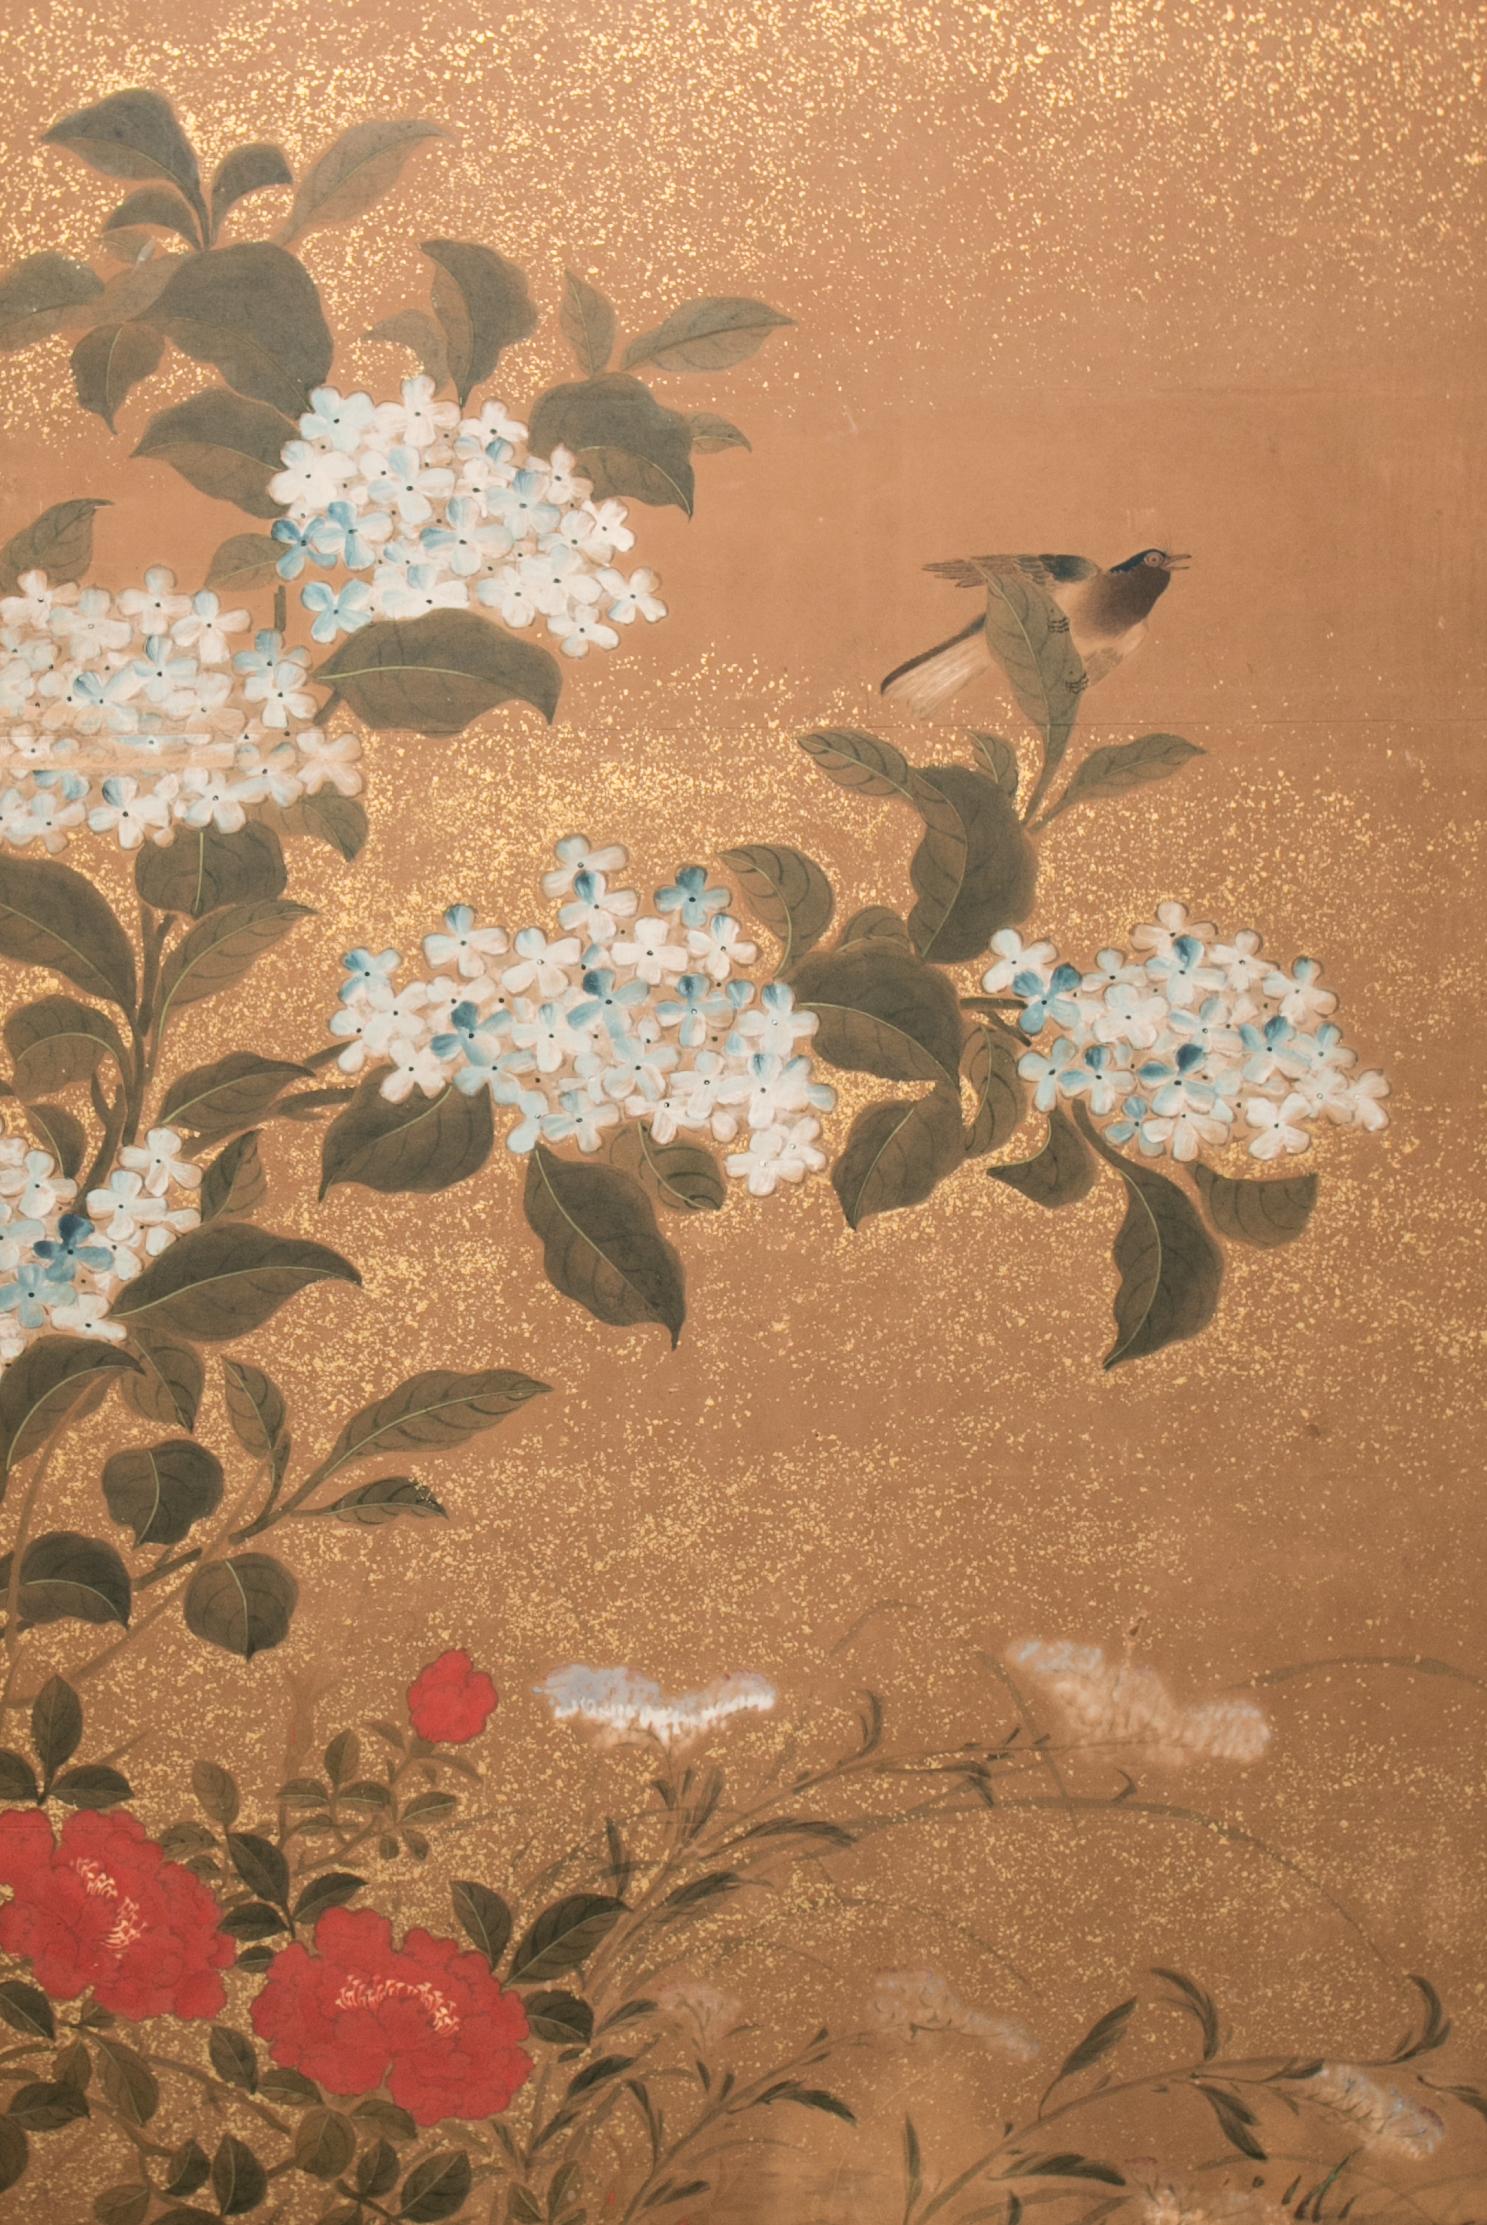 Meiji period (1868-1912) painting, with a lovely softness, celebrating spring. Painted in mineral pigments on mulberry paper with gold dust and a silk brocade border.